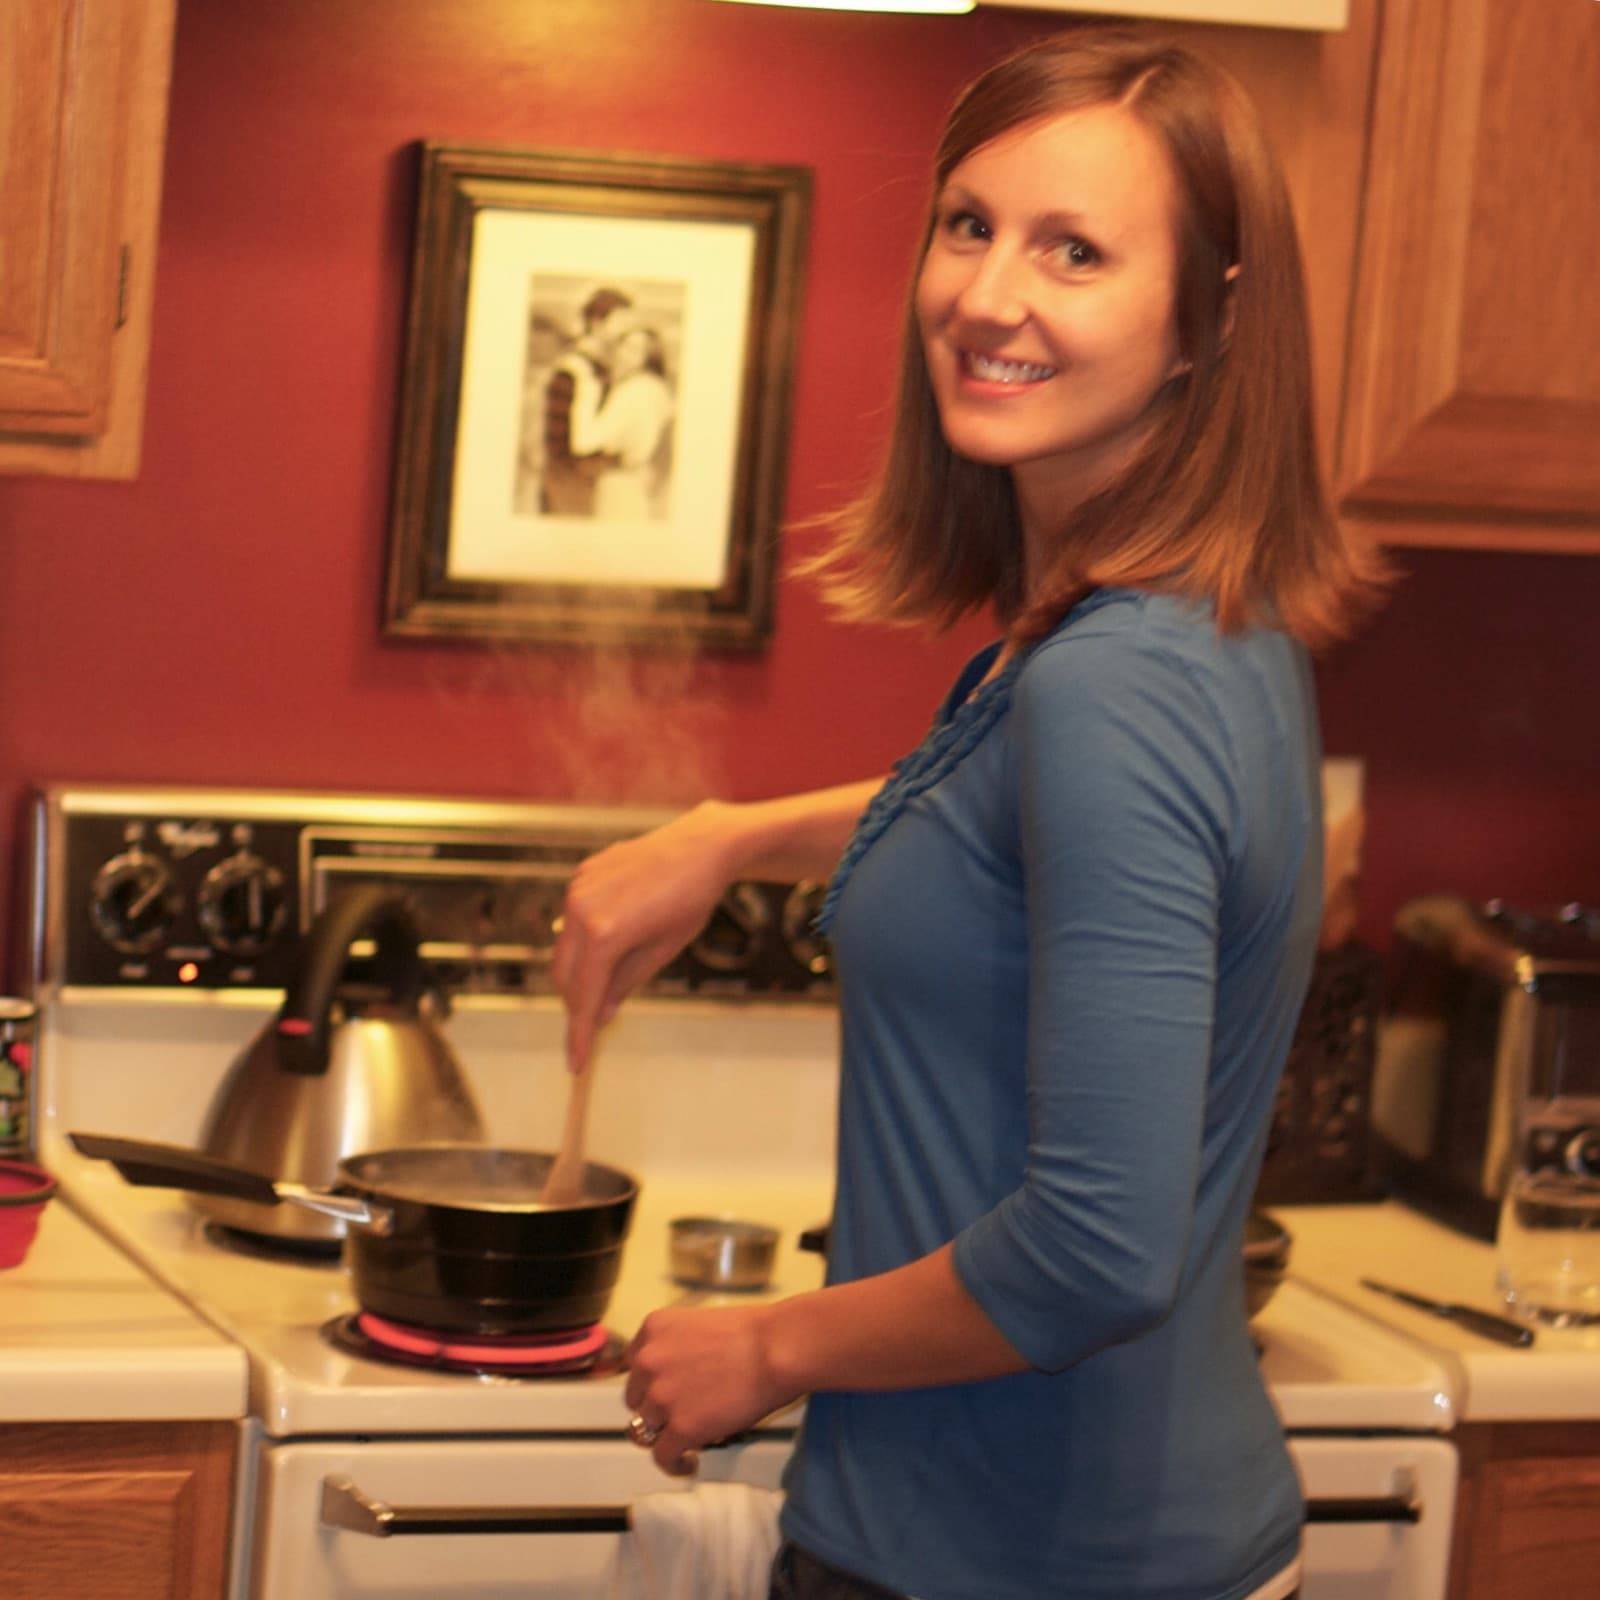 A woman smiling as she stirs food cooking in a pan.